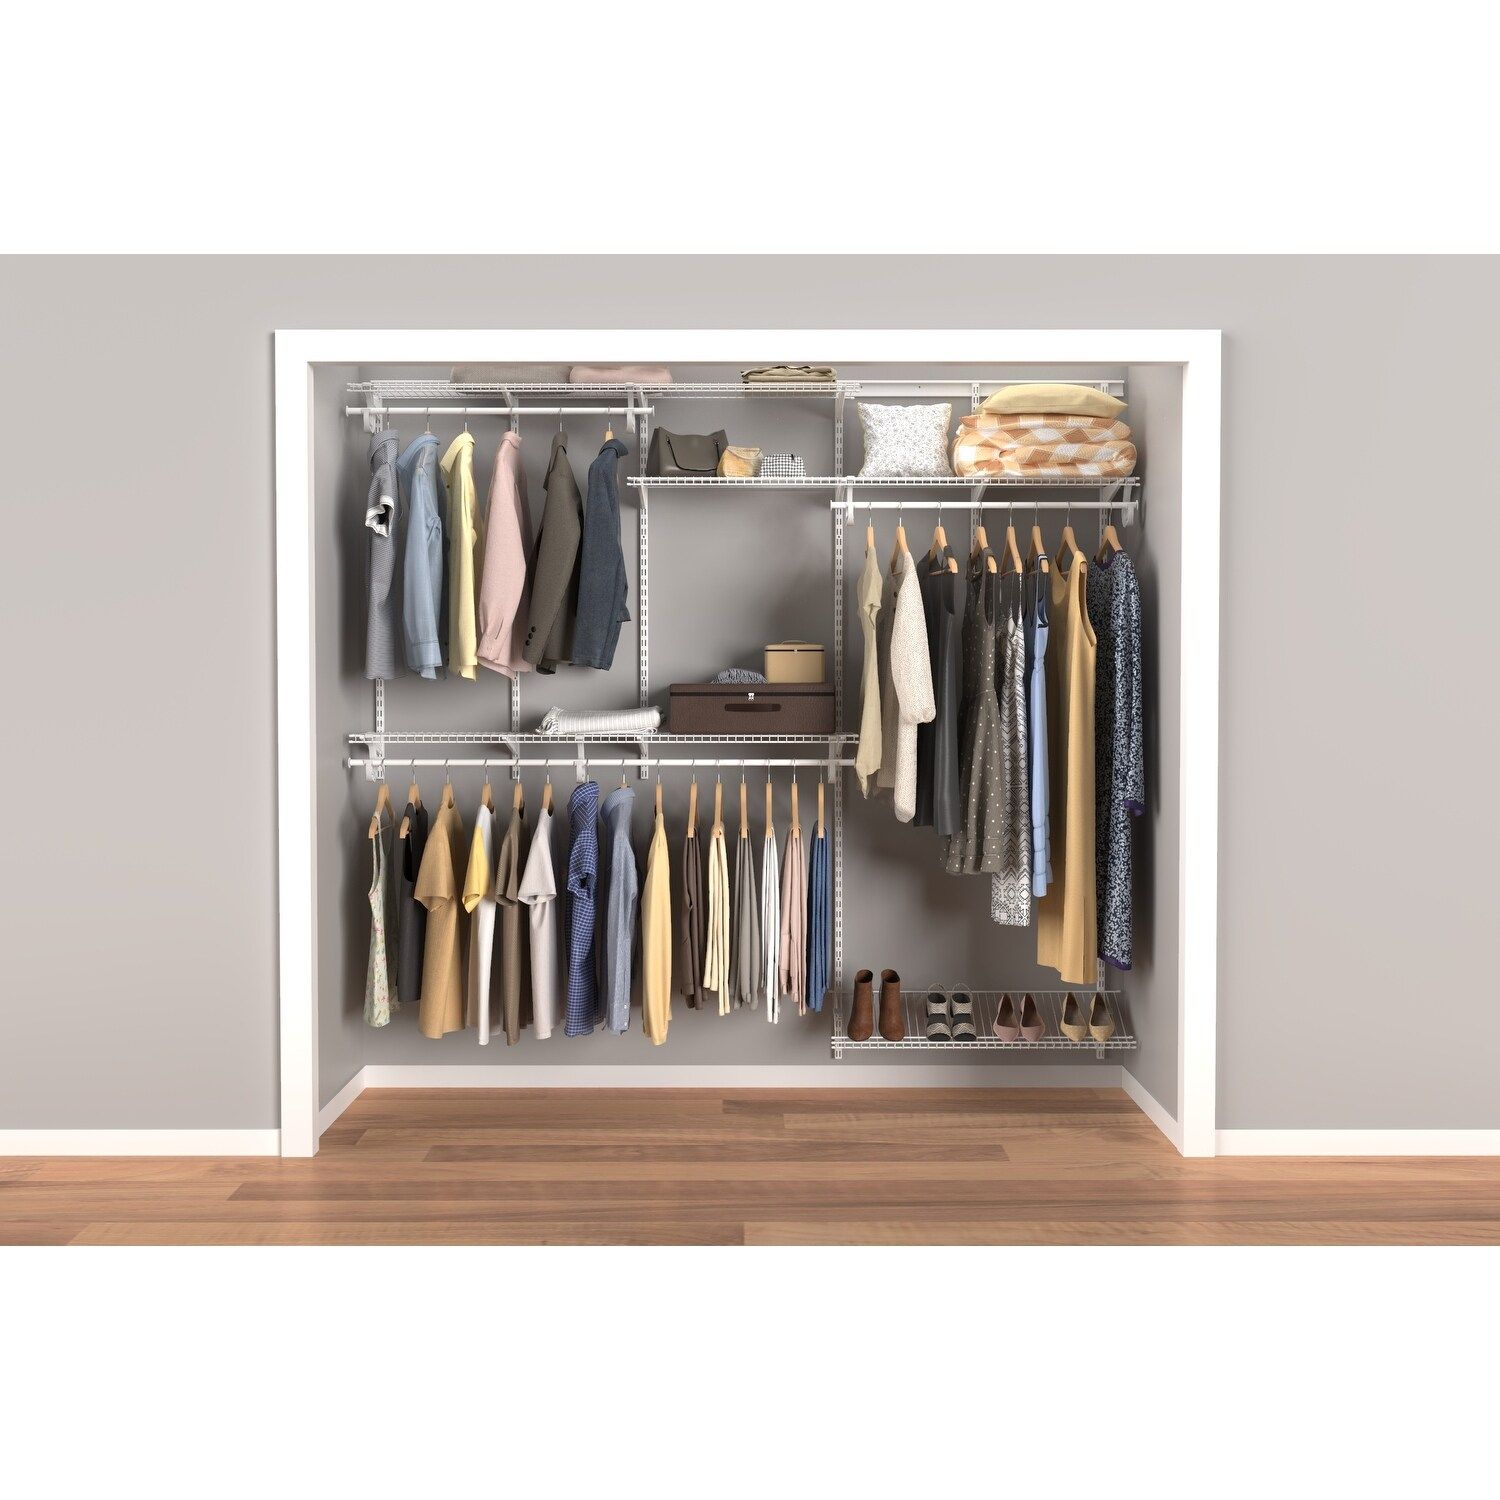 Closetmaid Shelftrack 60 96 Inch Wide Adjustable Closet Organizer – On Sale  – Bed Bath & Beyond – 10581832 Inside 96 Inches Wardrobes (View 8 of 15)